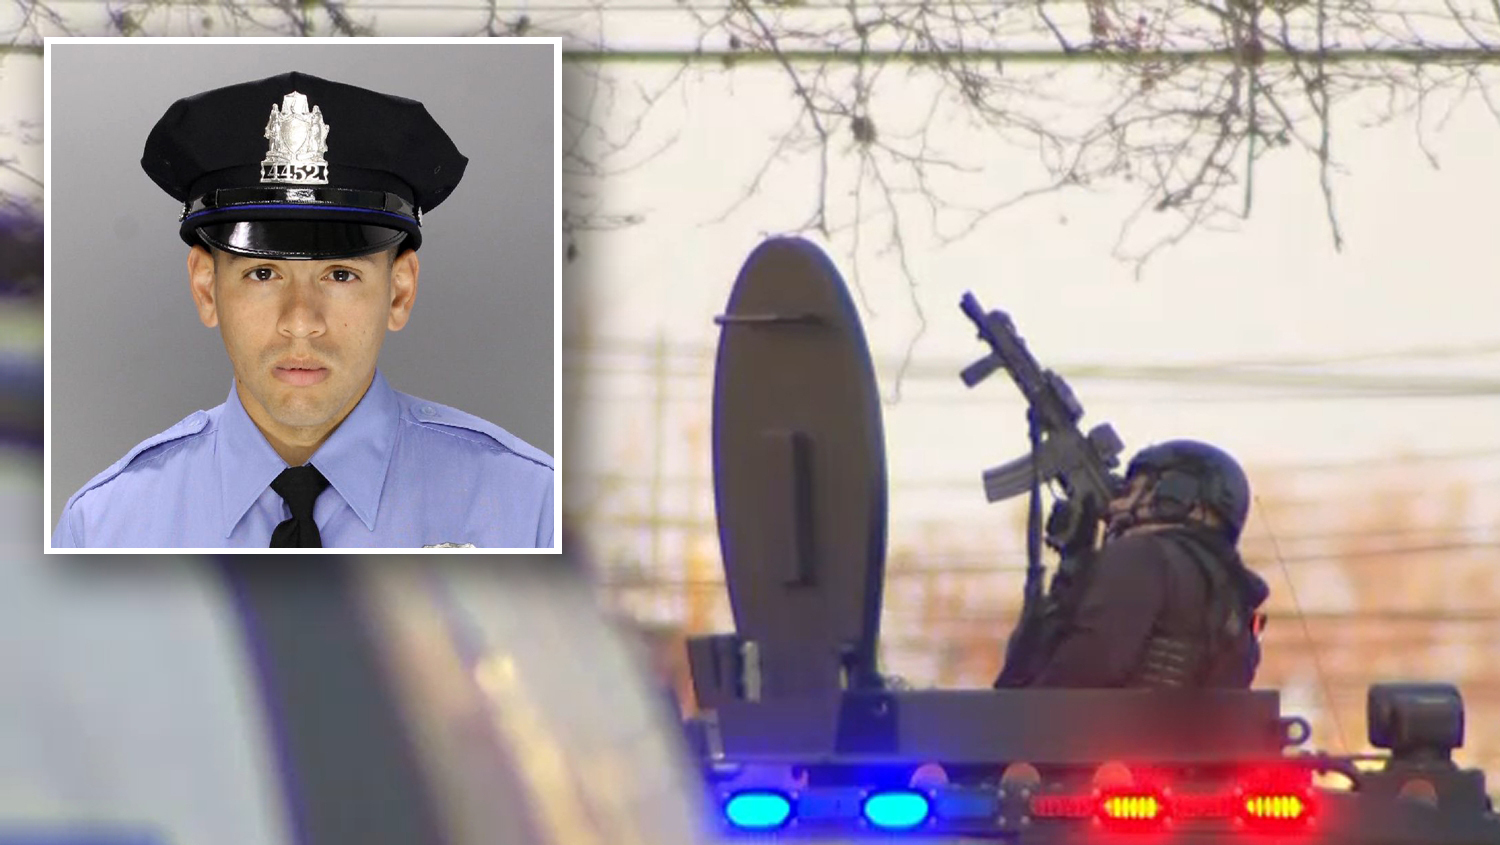 Philadelphia Police Officer Giovanni Maysonet is seen inset over a SWAT officer with a gun